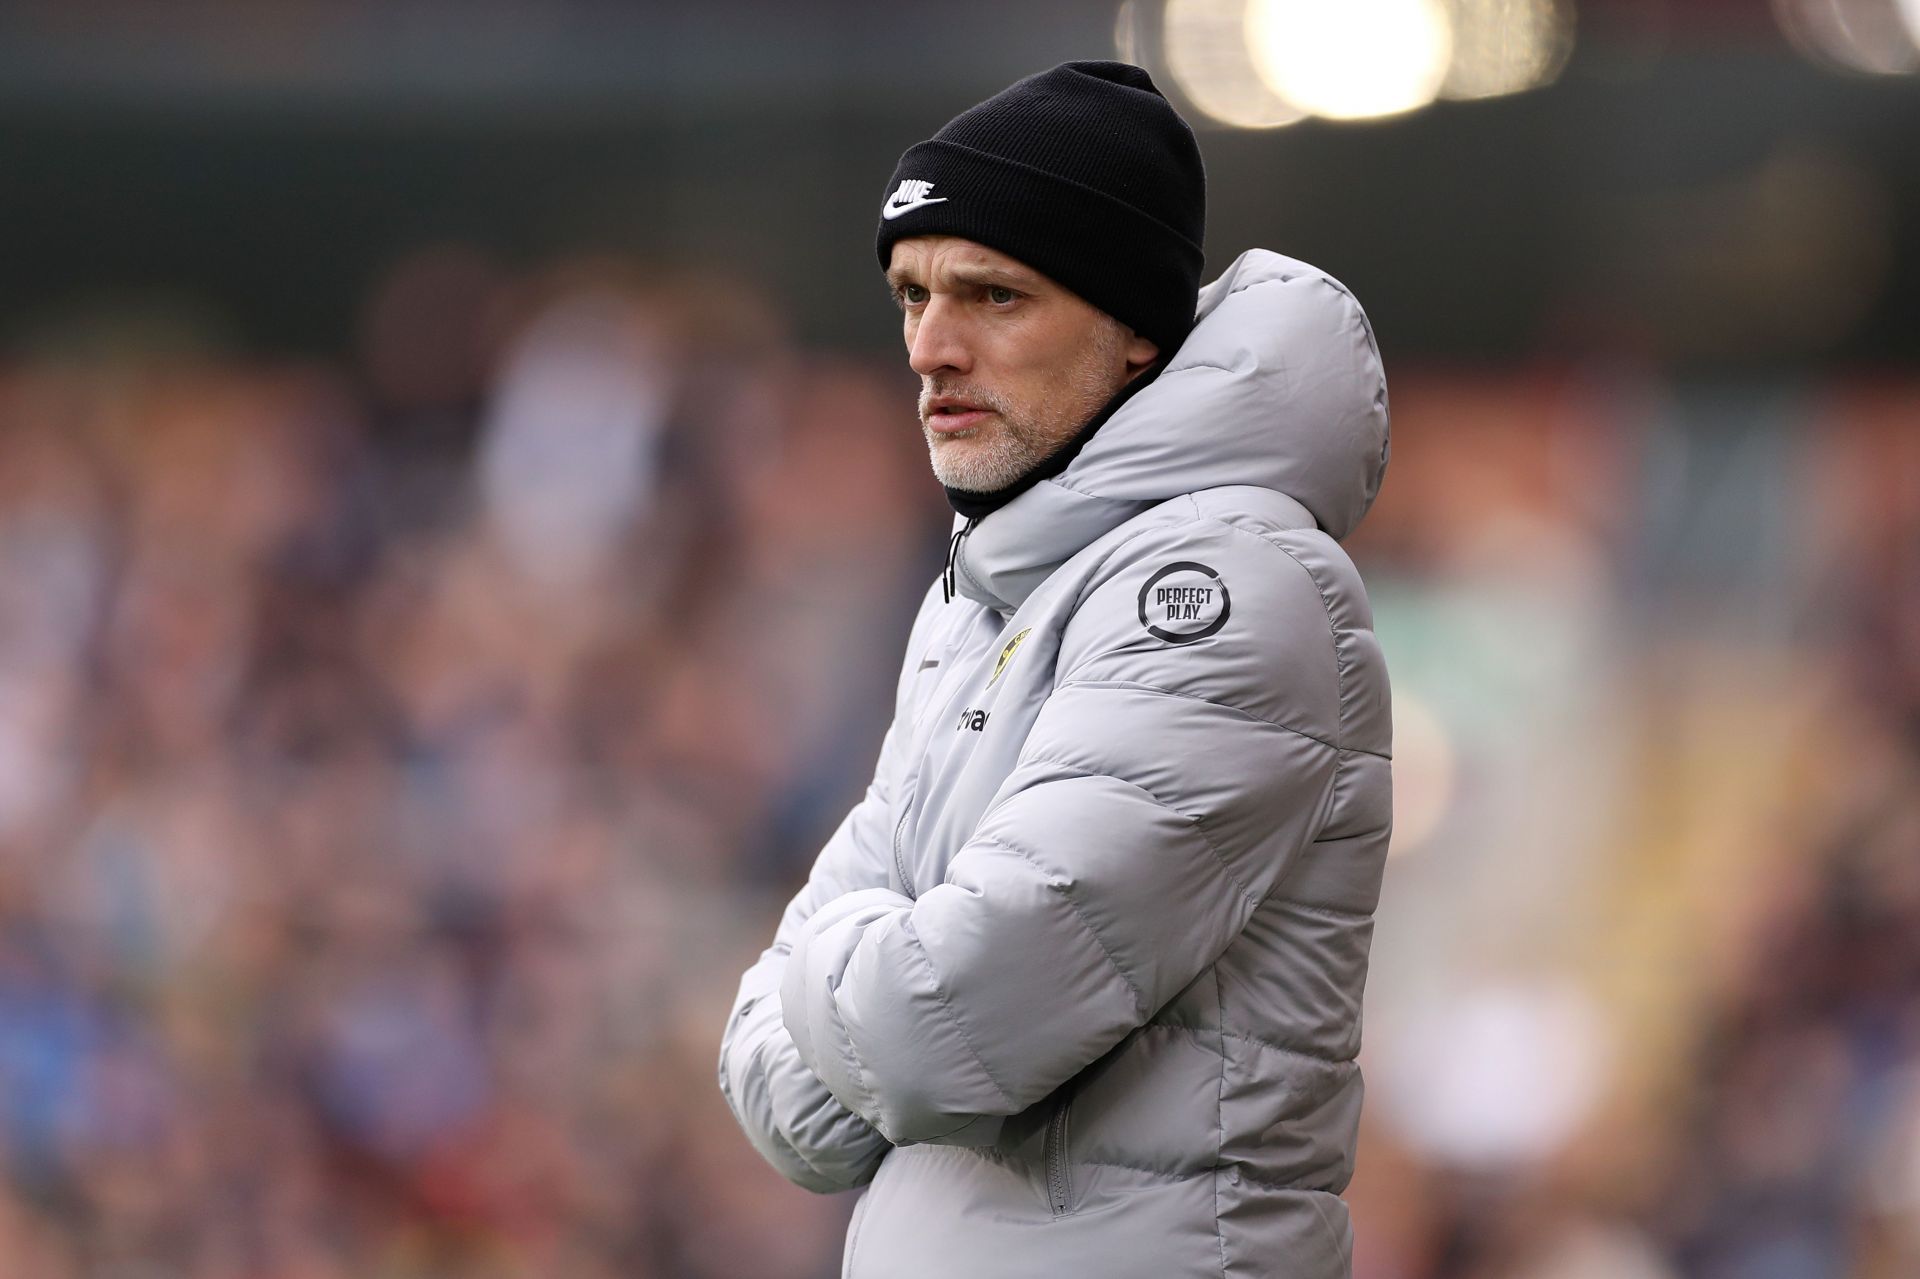 Chelsea manager Thomas Tuchel has taken his team to the quarter-finals of the UEFA Champions League.